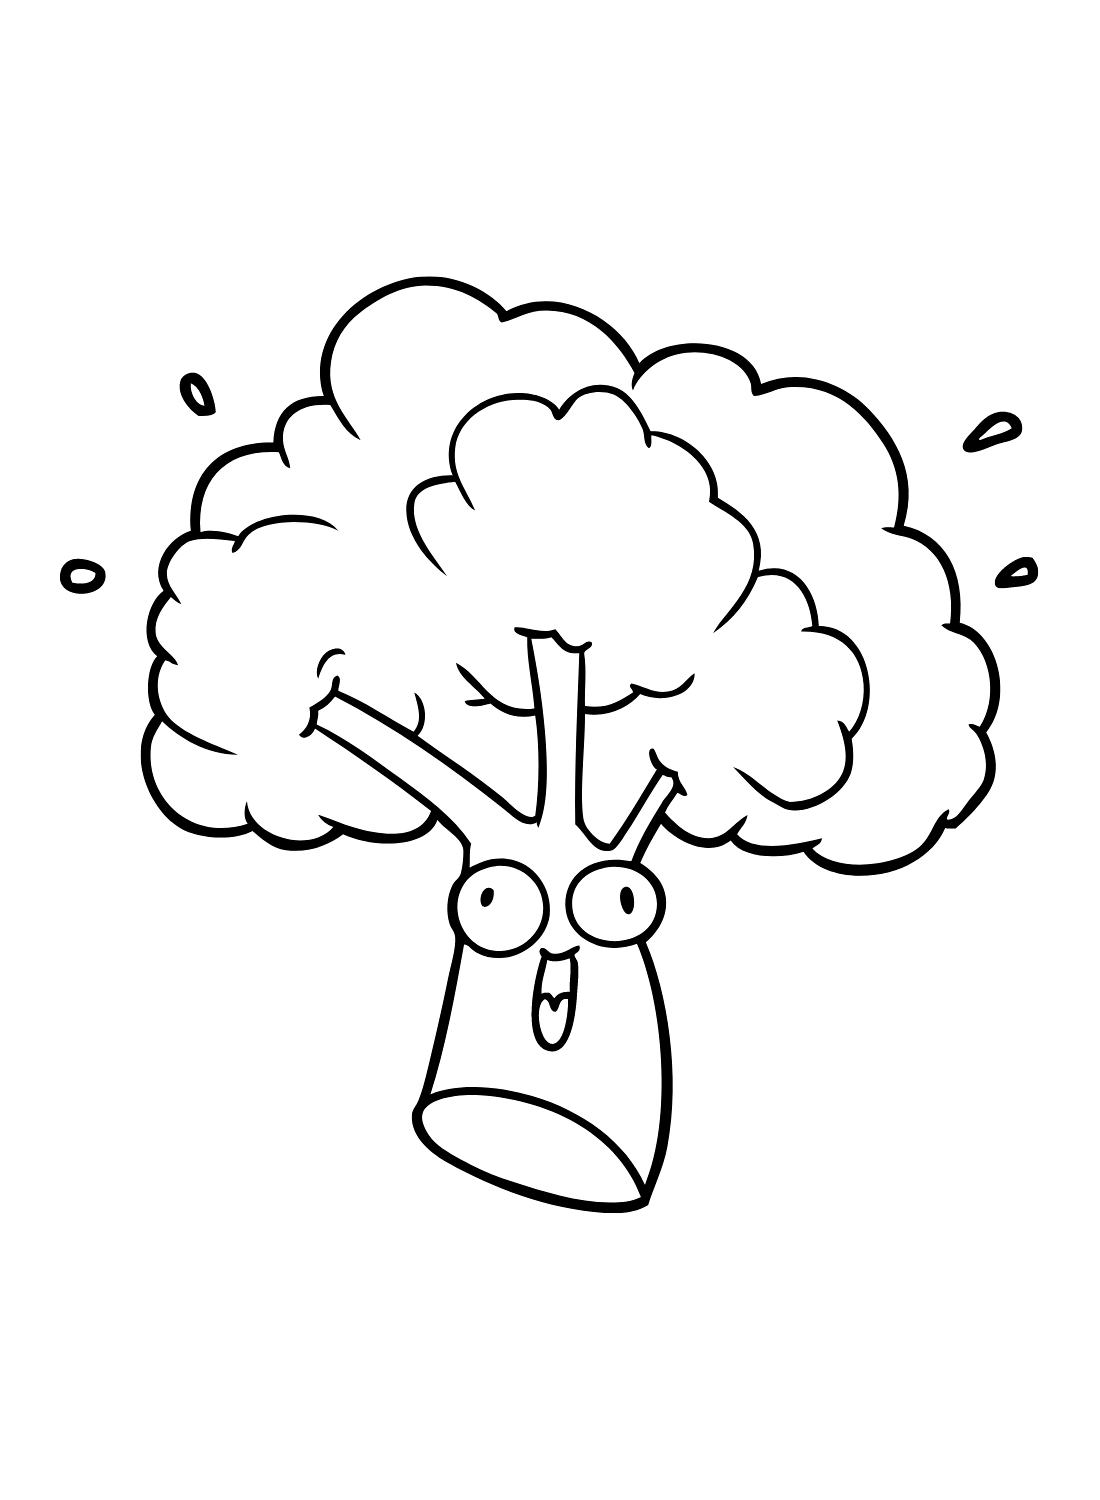 Funny Broccoli Vegetables Coloring Pages